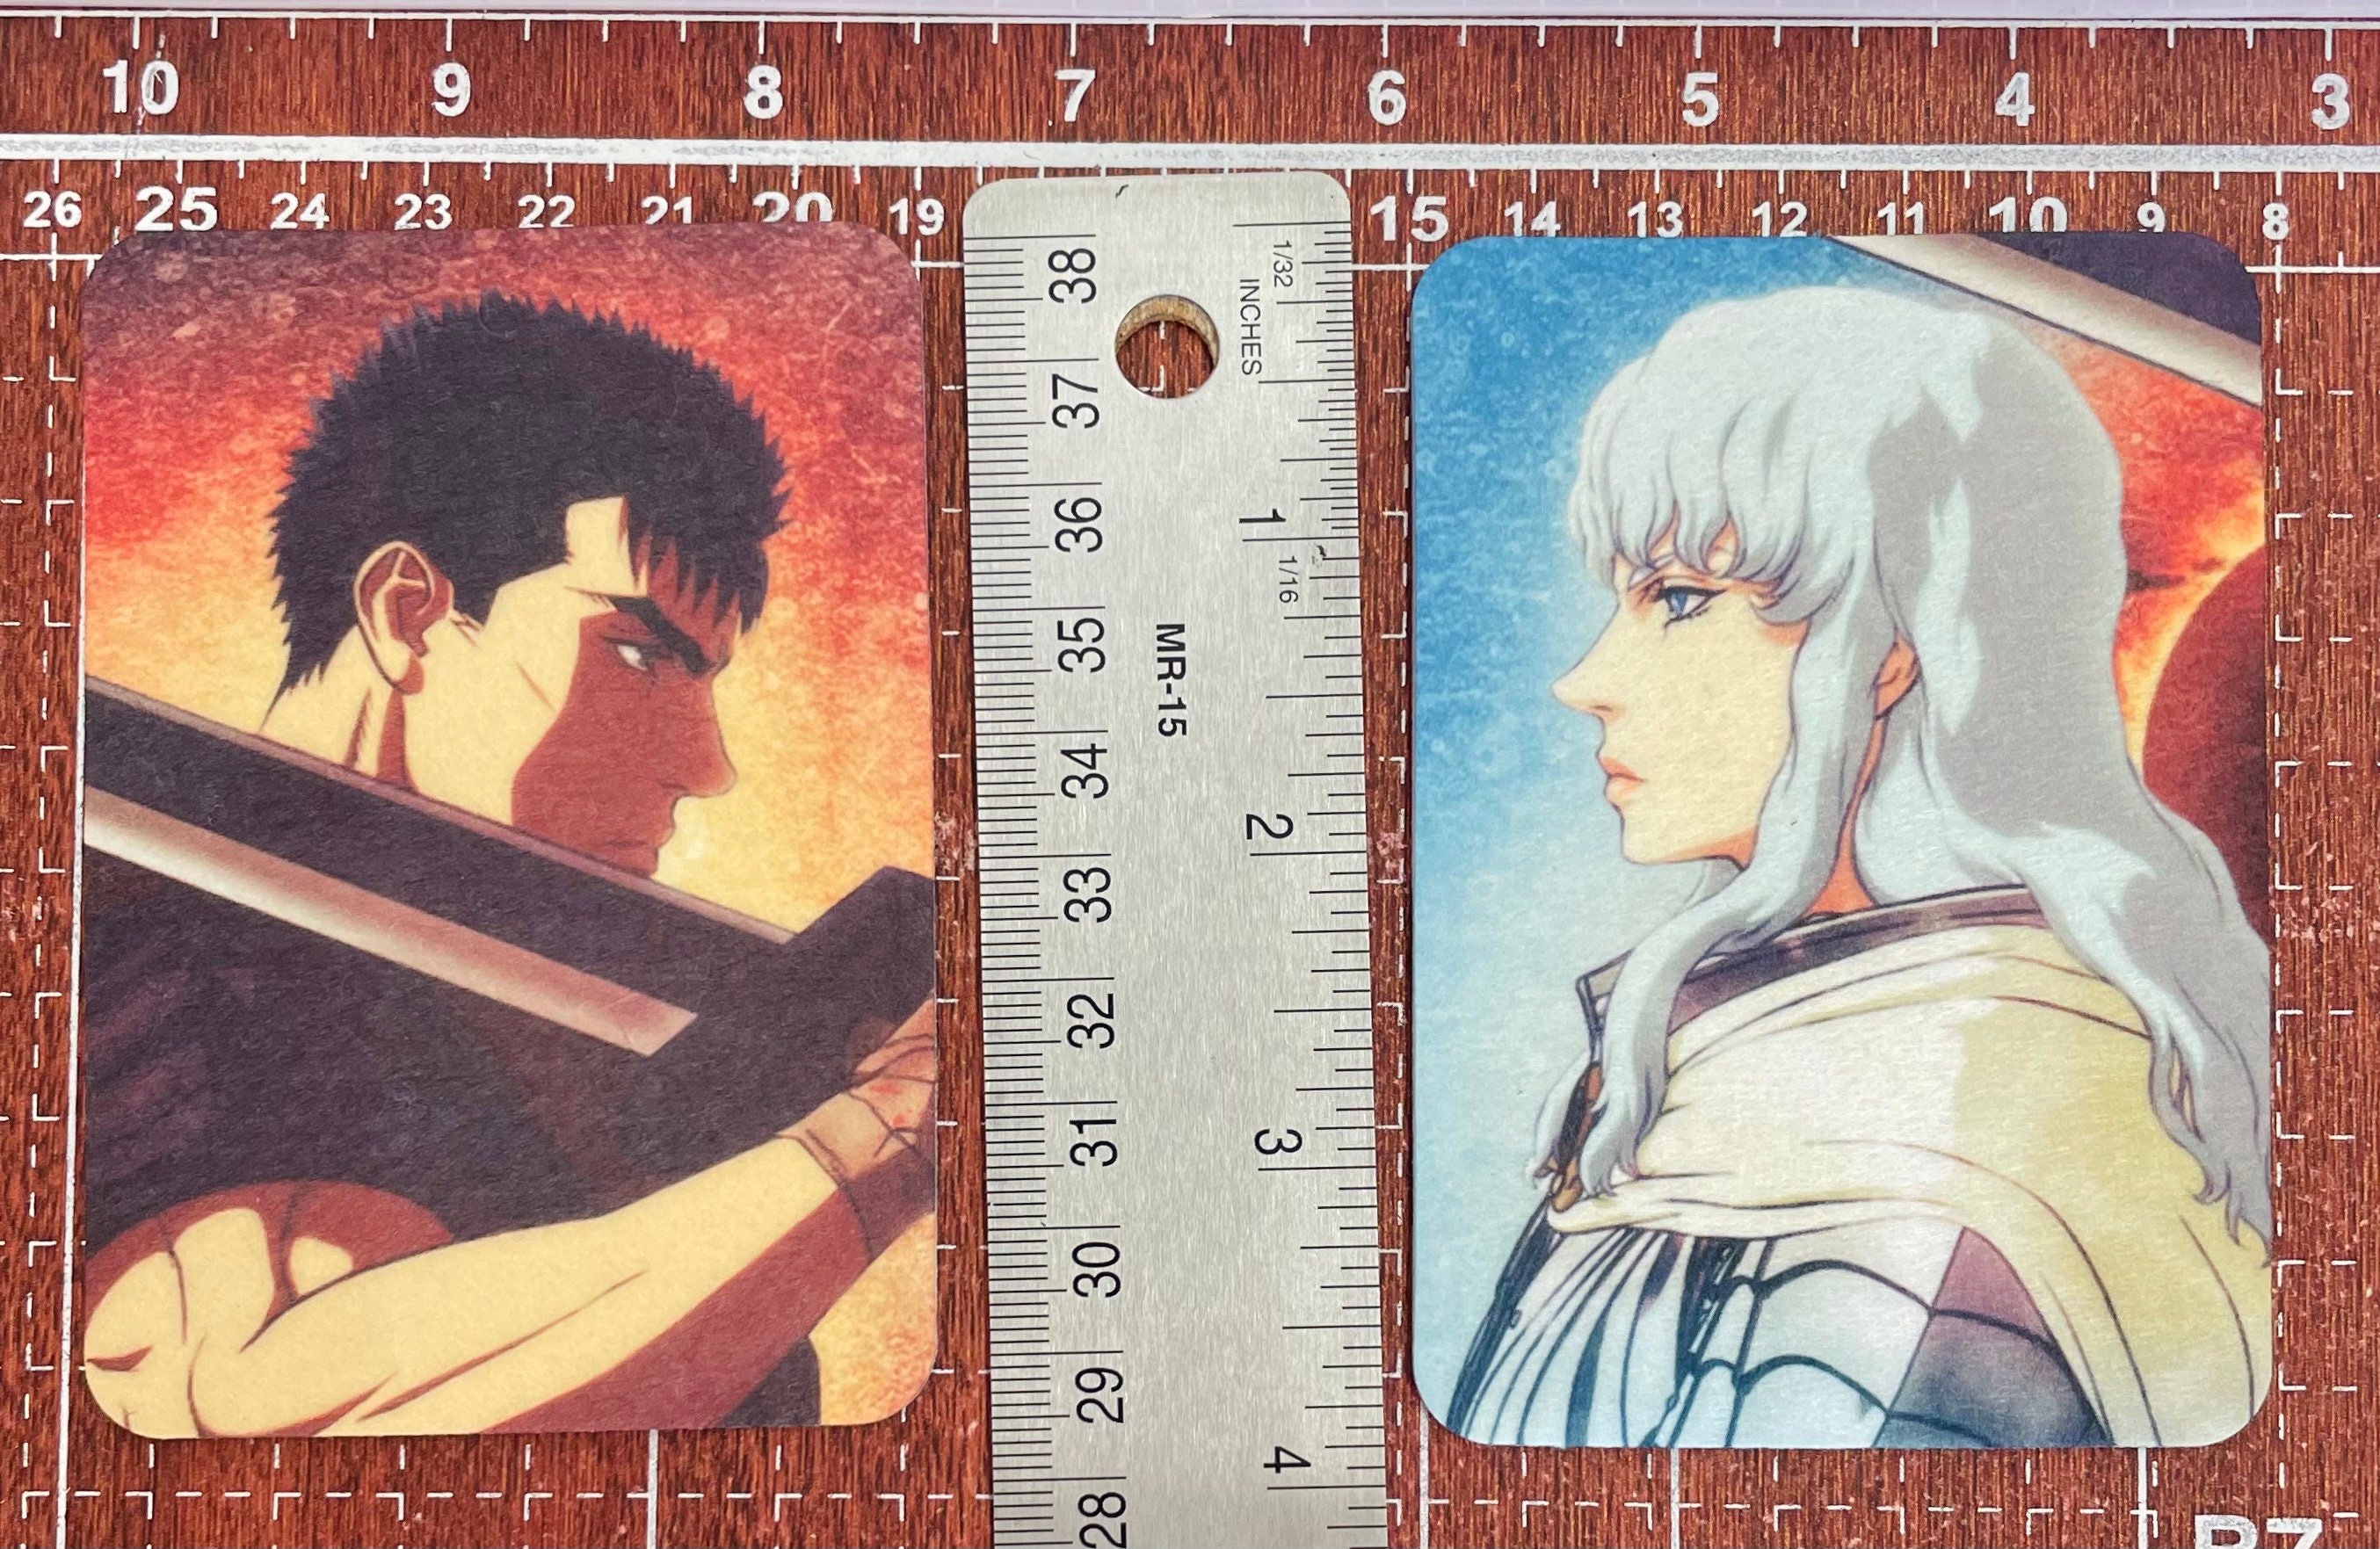 Anime Guts and Griffith Face off Single Car Air Freshener Auto 